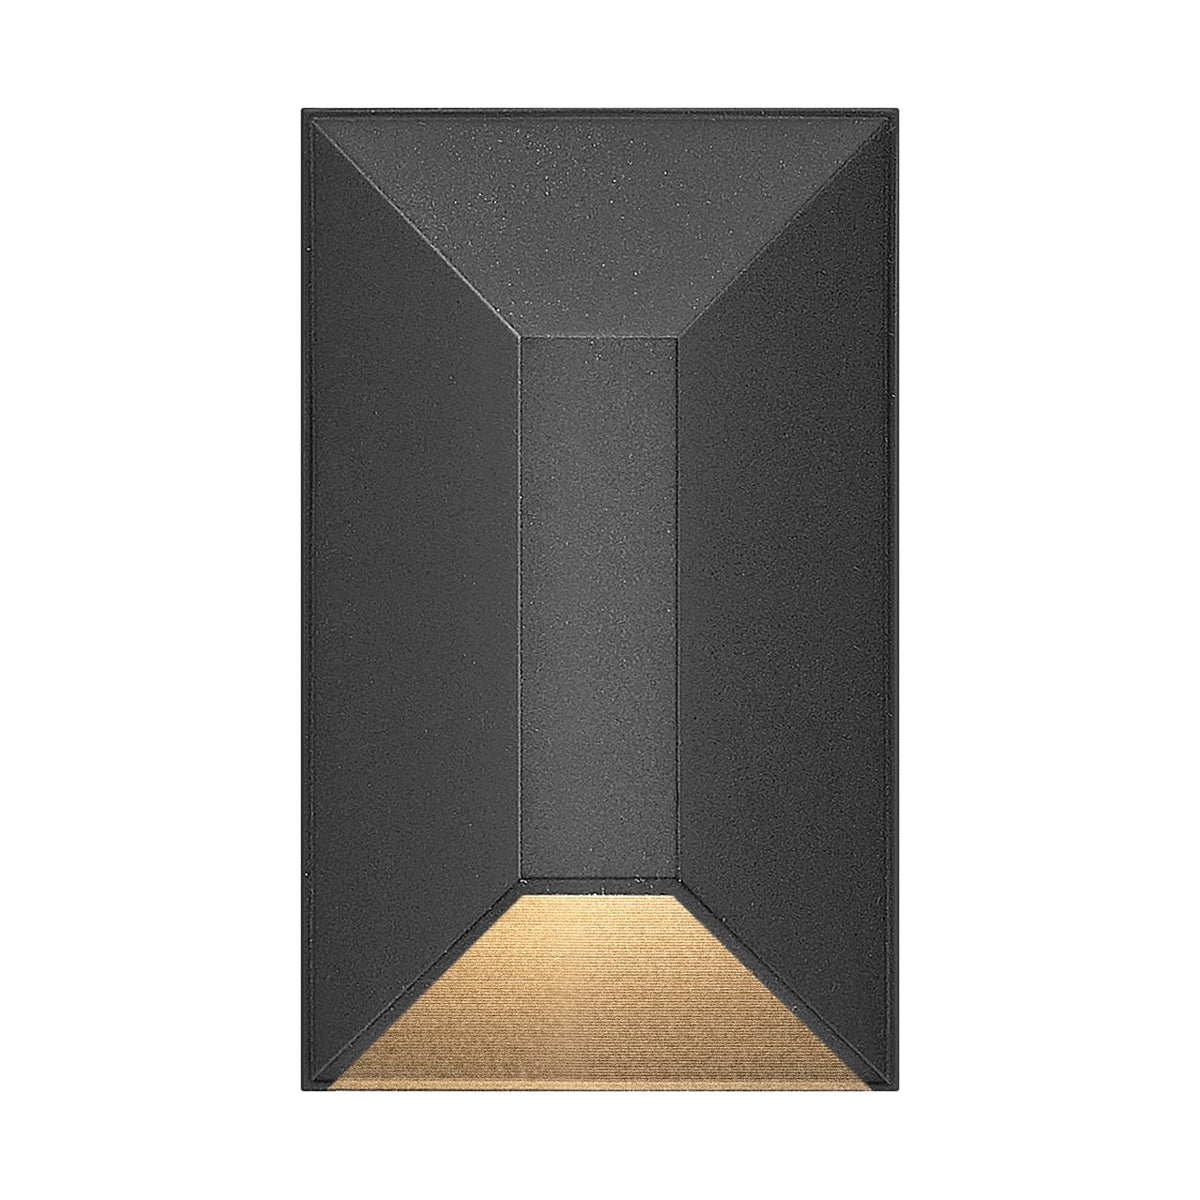 Hinkley Canada - 15223BK - LED Wall Sconce - Nuvi Deck Sconce - Black